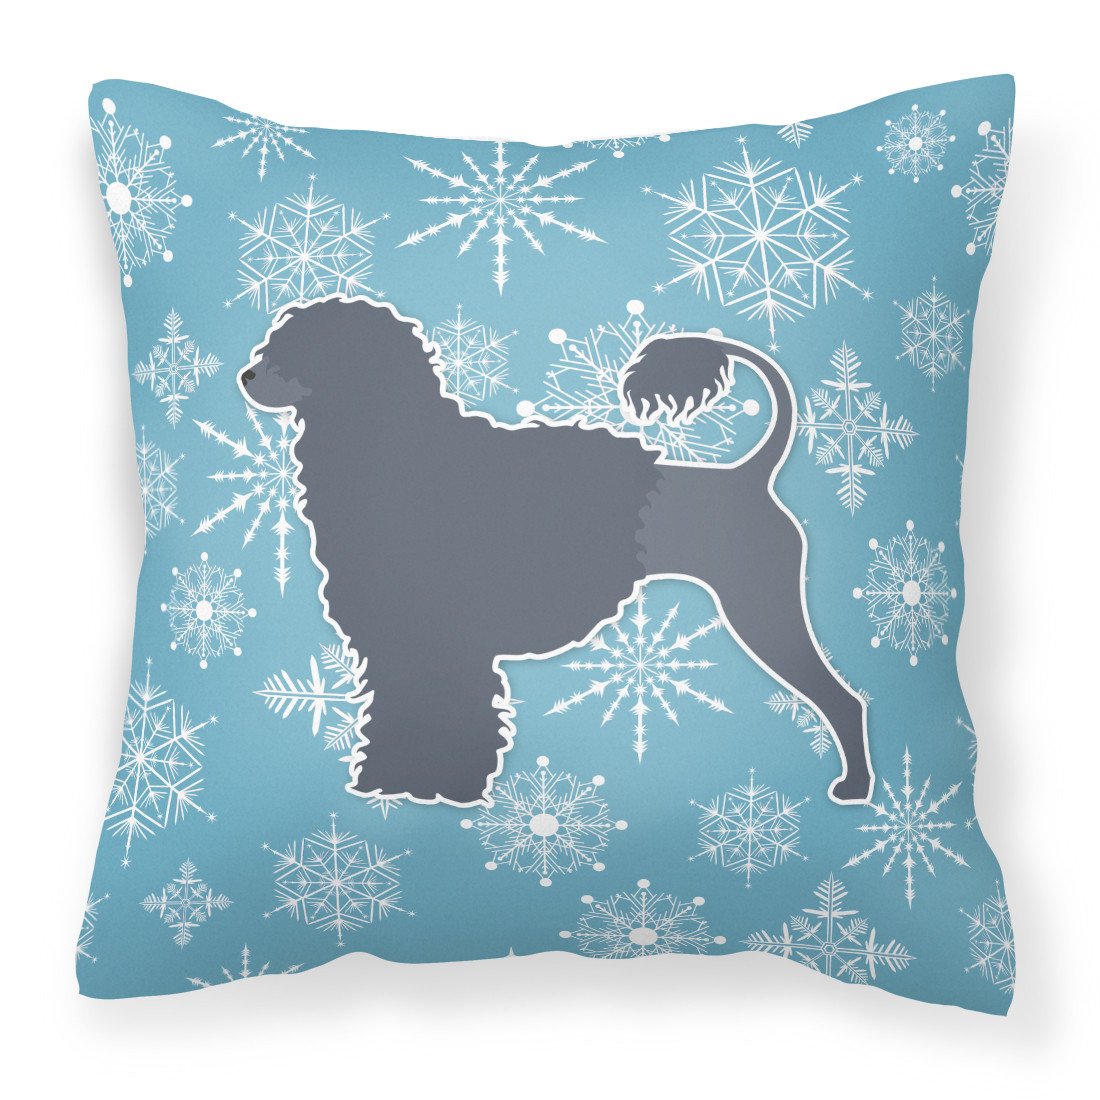 Winter Snowflake Portuguese Water Dog Fabric Decorative Pillow BB3568PW1818 by Caroline's Treasures